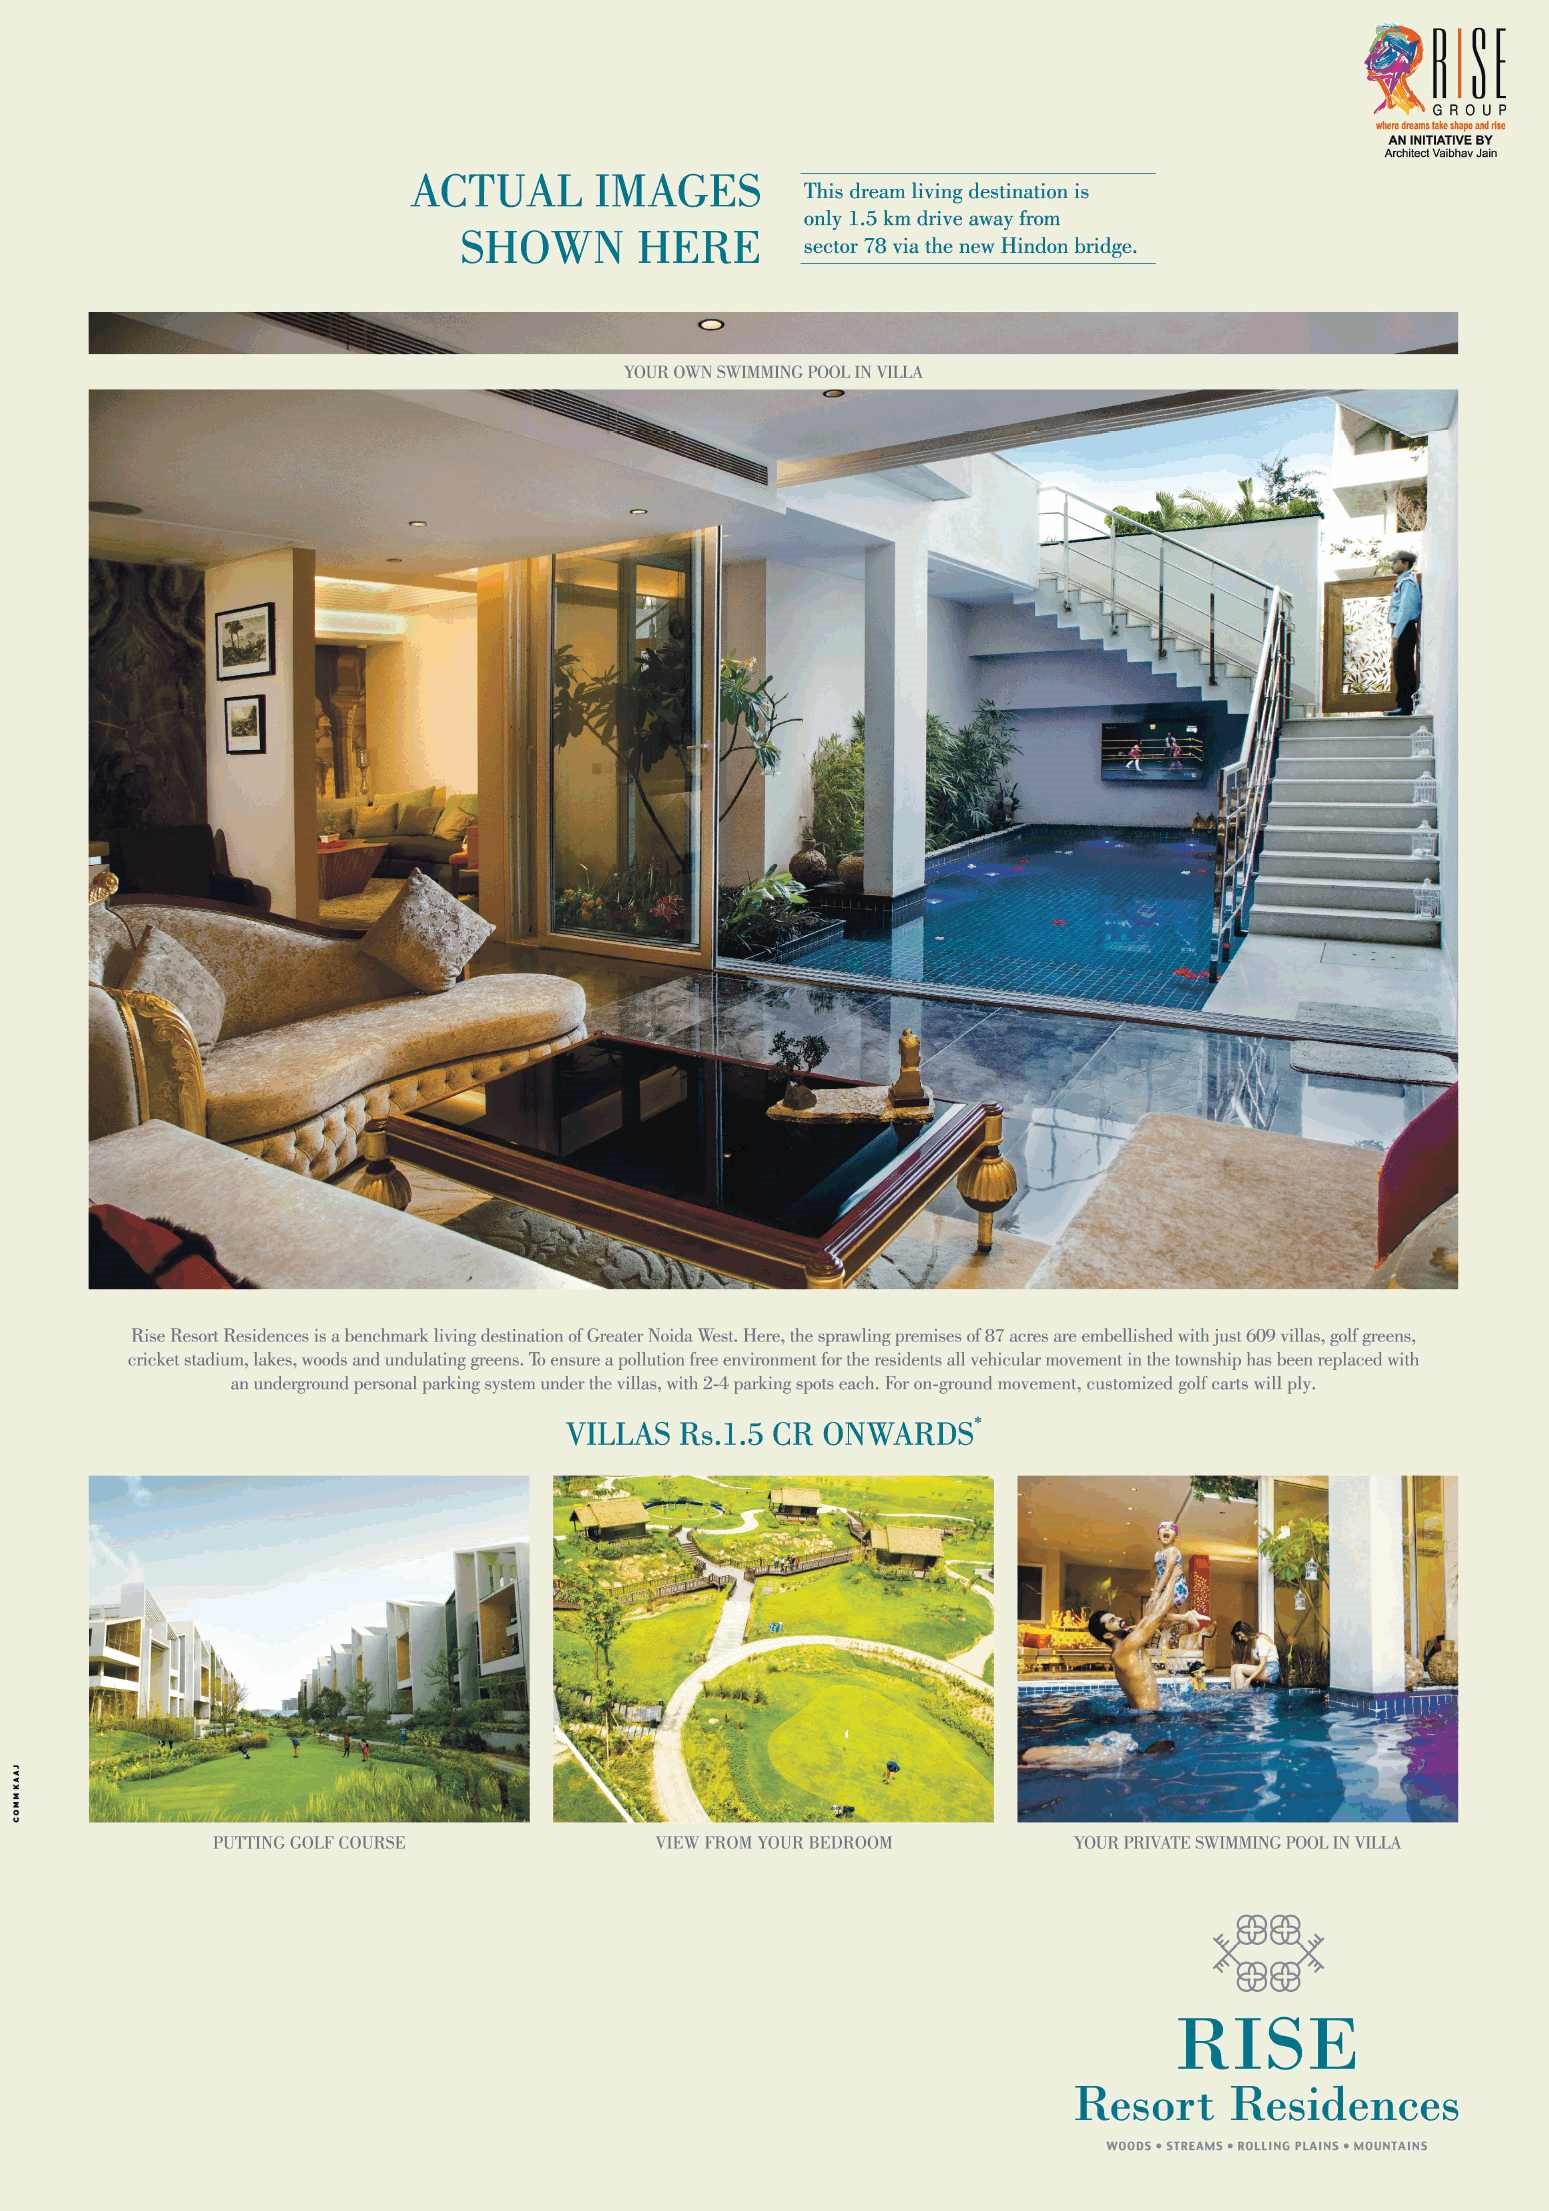 Enjoy your own swimming pool at Rise Resort Residences in Greater Noida